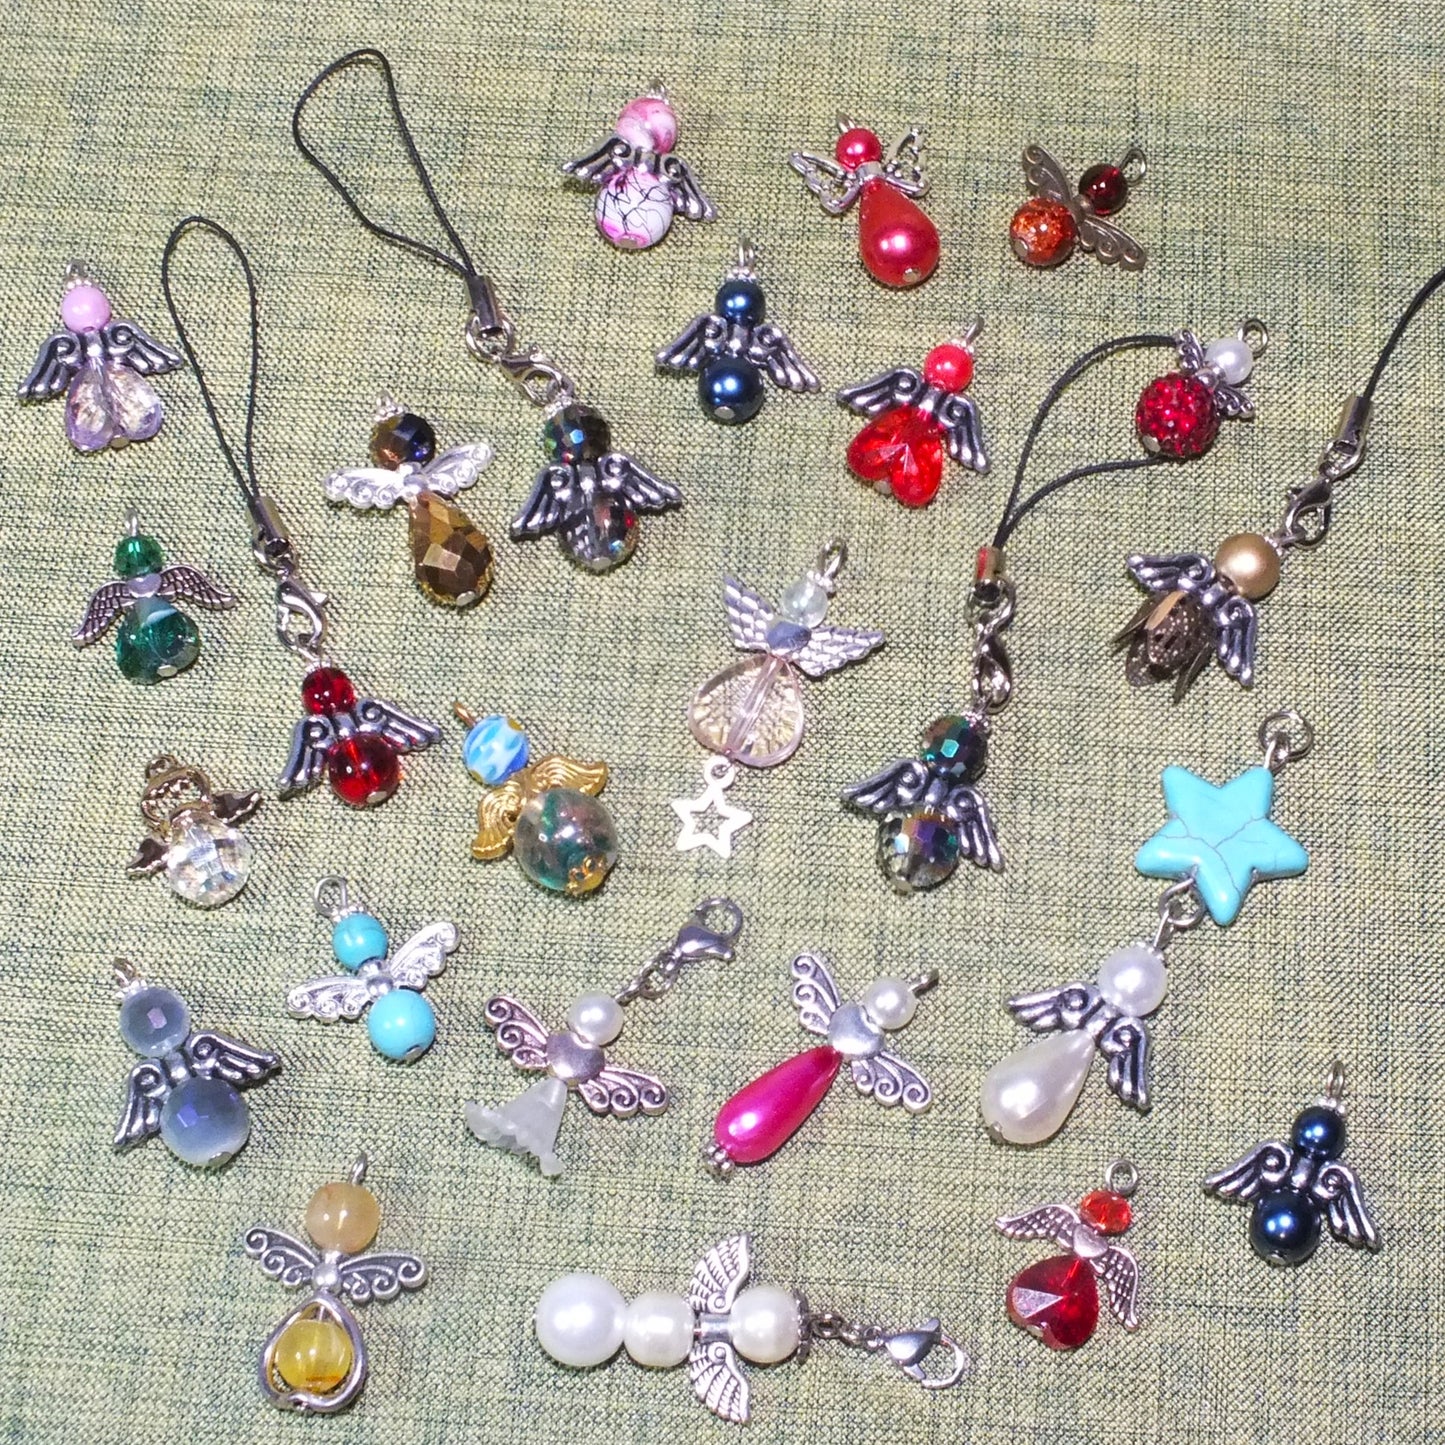 Lucky dip Guardian Angel charms (12-250pcs - large, small or mixed)